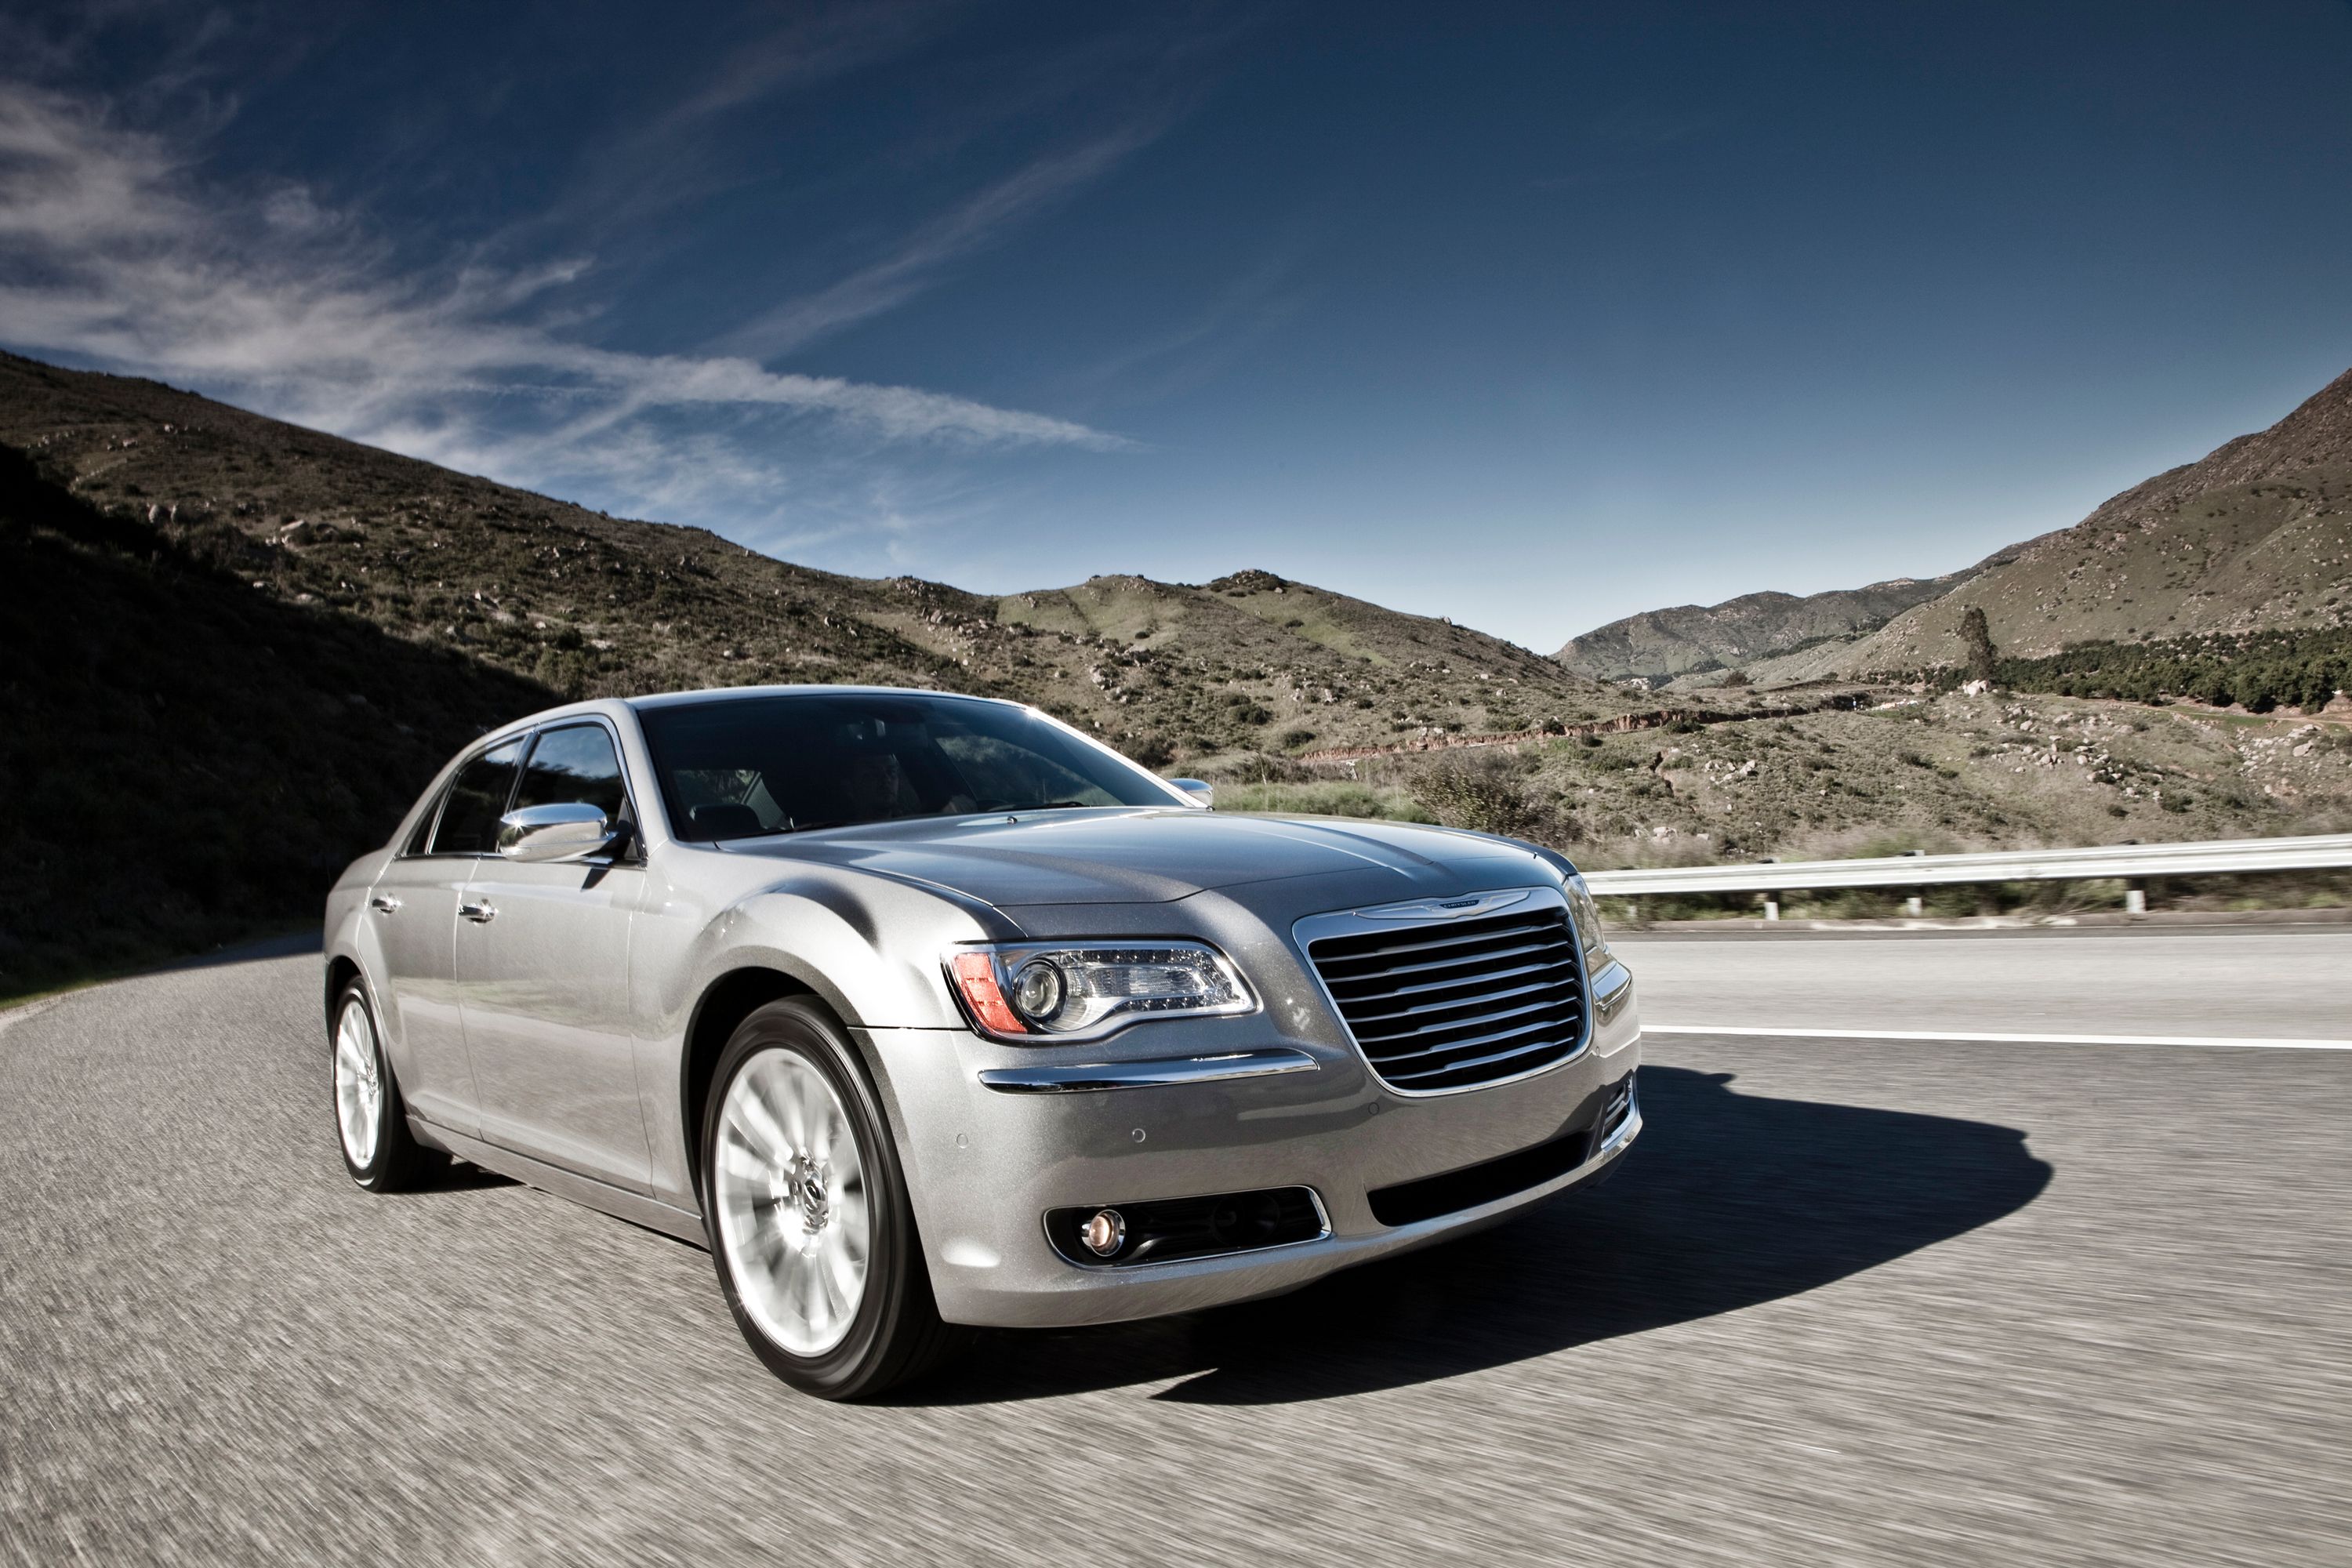 2013 Chrysler 300 Color, Specs, Pricing